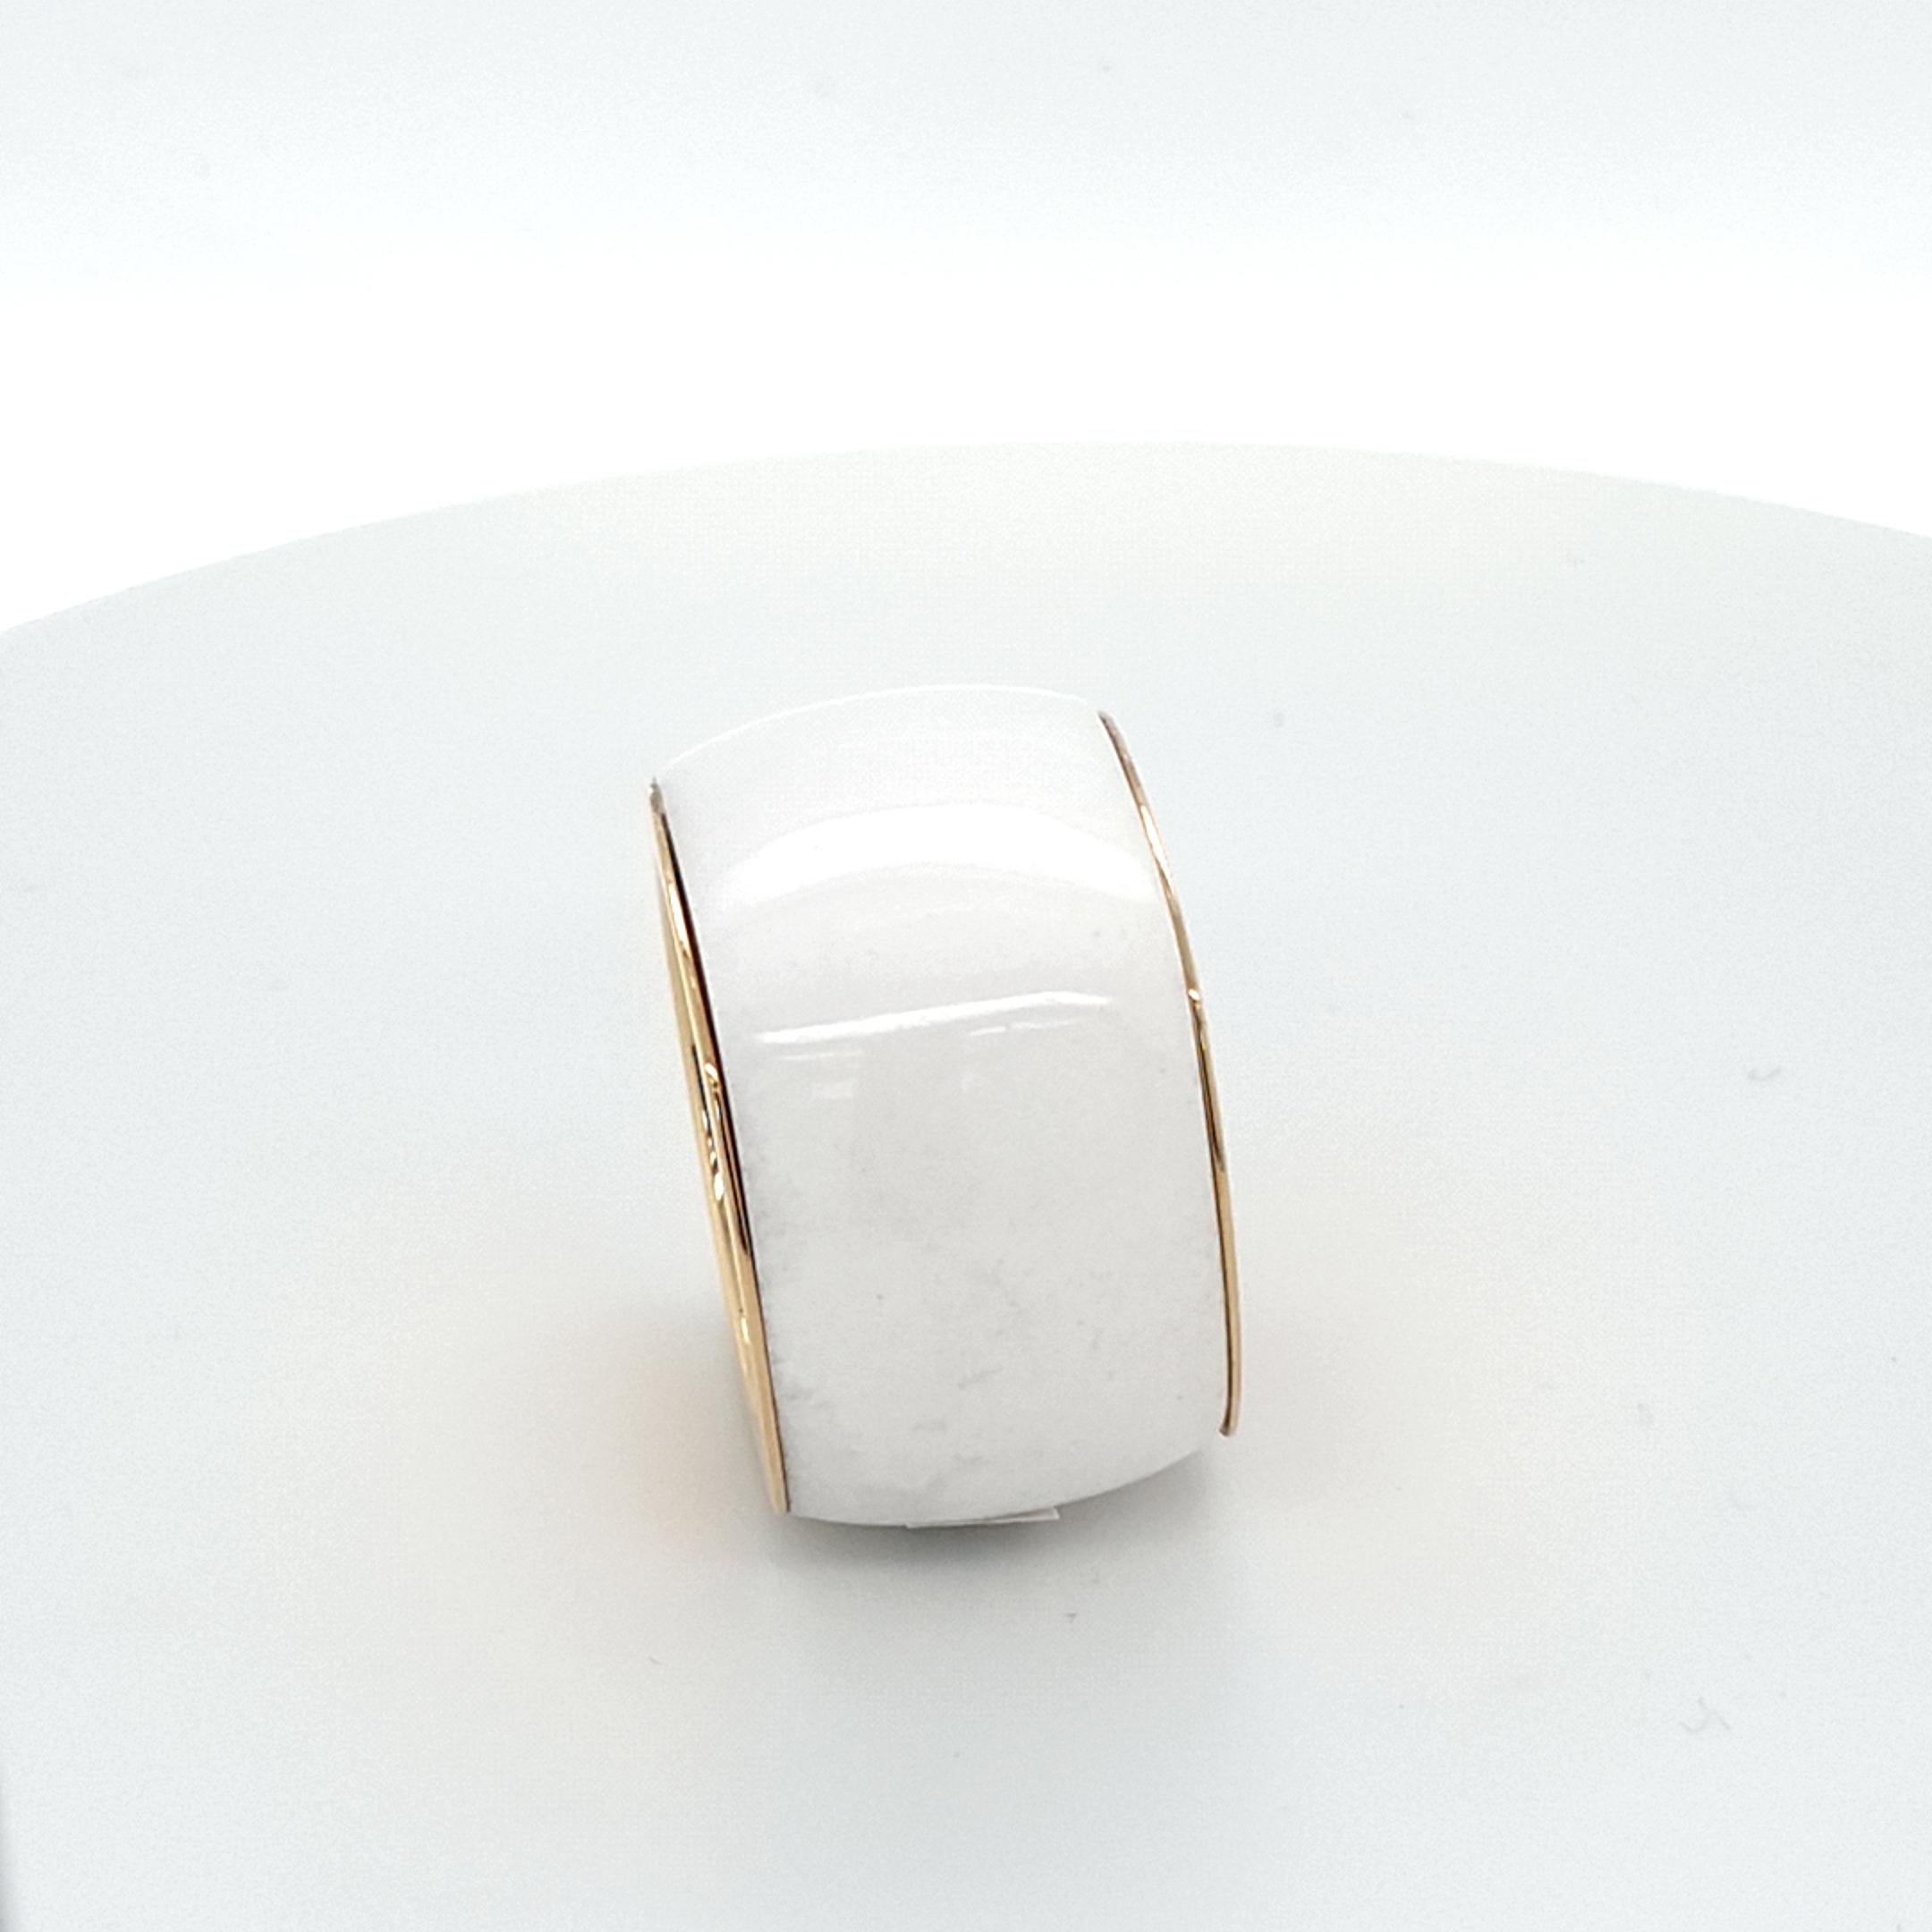 This Natural White Agate Ring with 18 Carat Yellow Gold is totally handmade.
Cutting as well as goldwork are made in German quality. 
Finding a suitable nice Natural White Agate to cut a whole ring out of one piece is very difficult.
The cushion